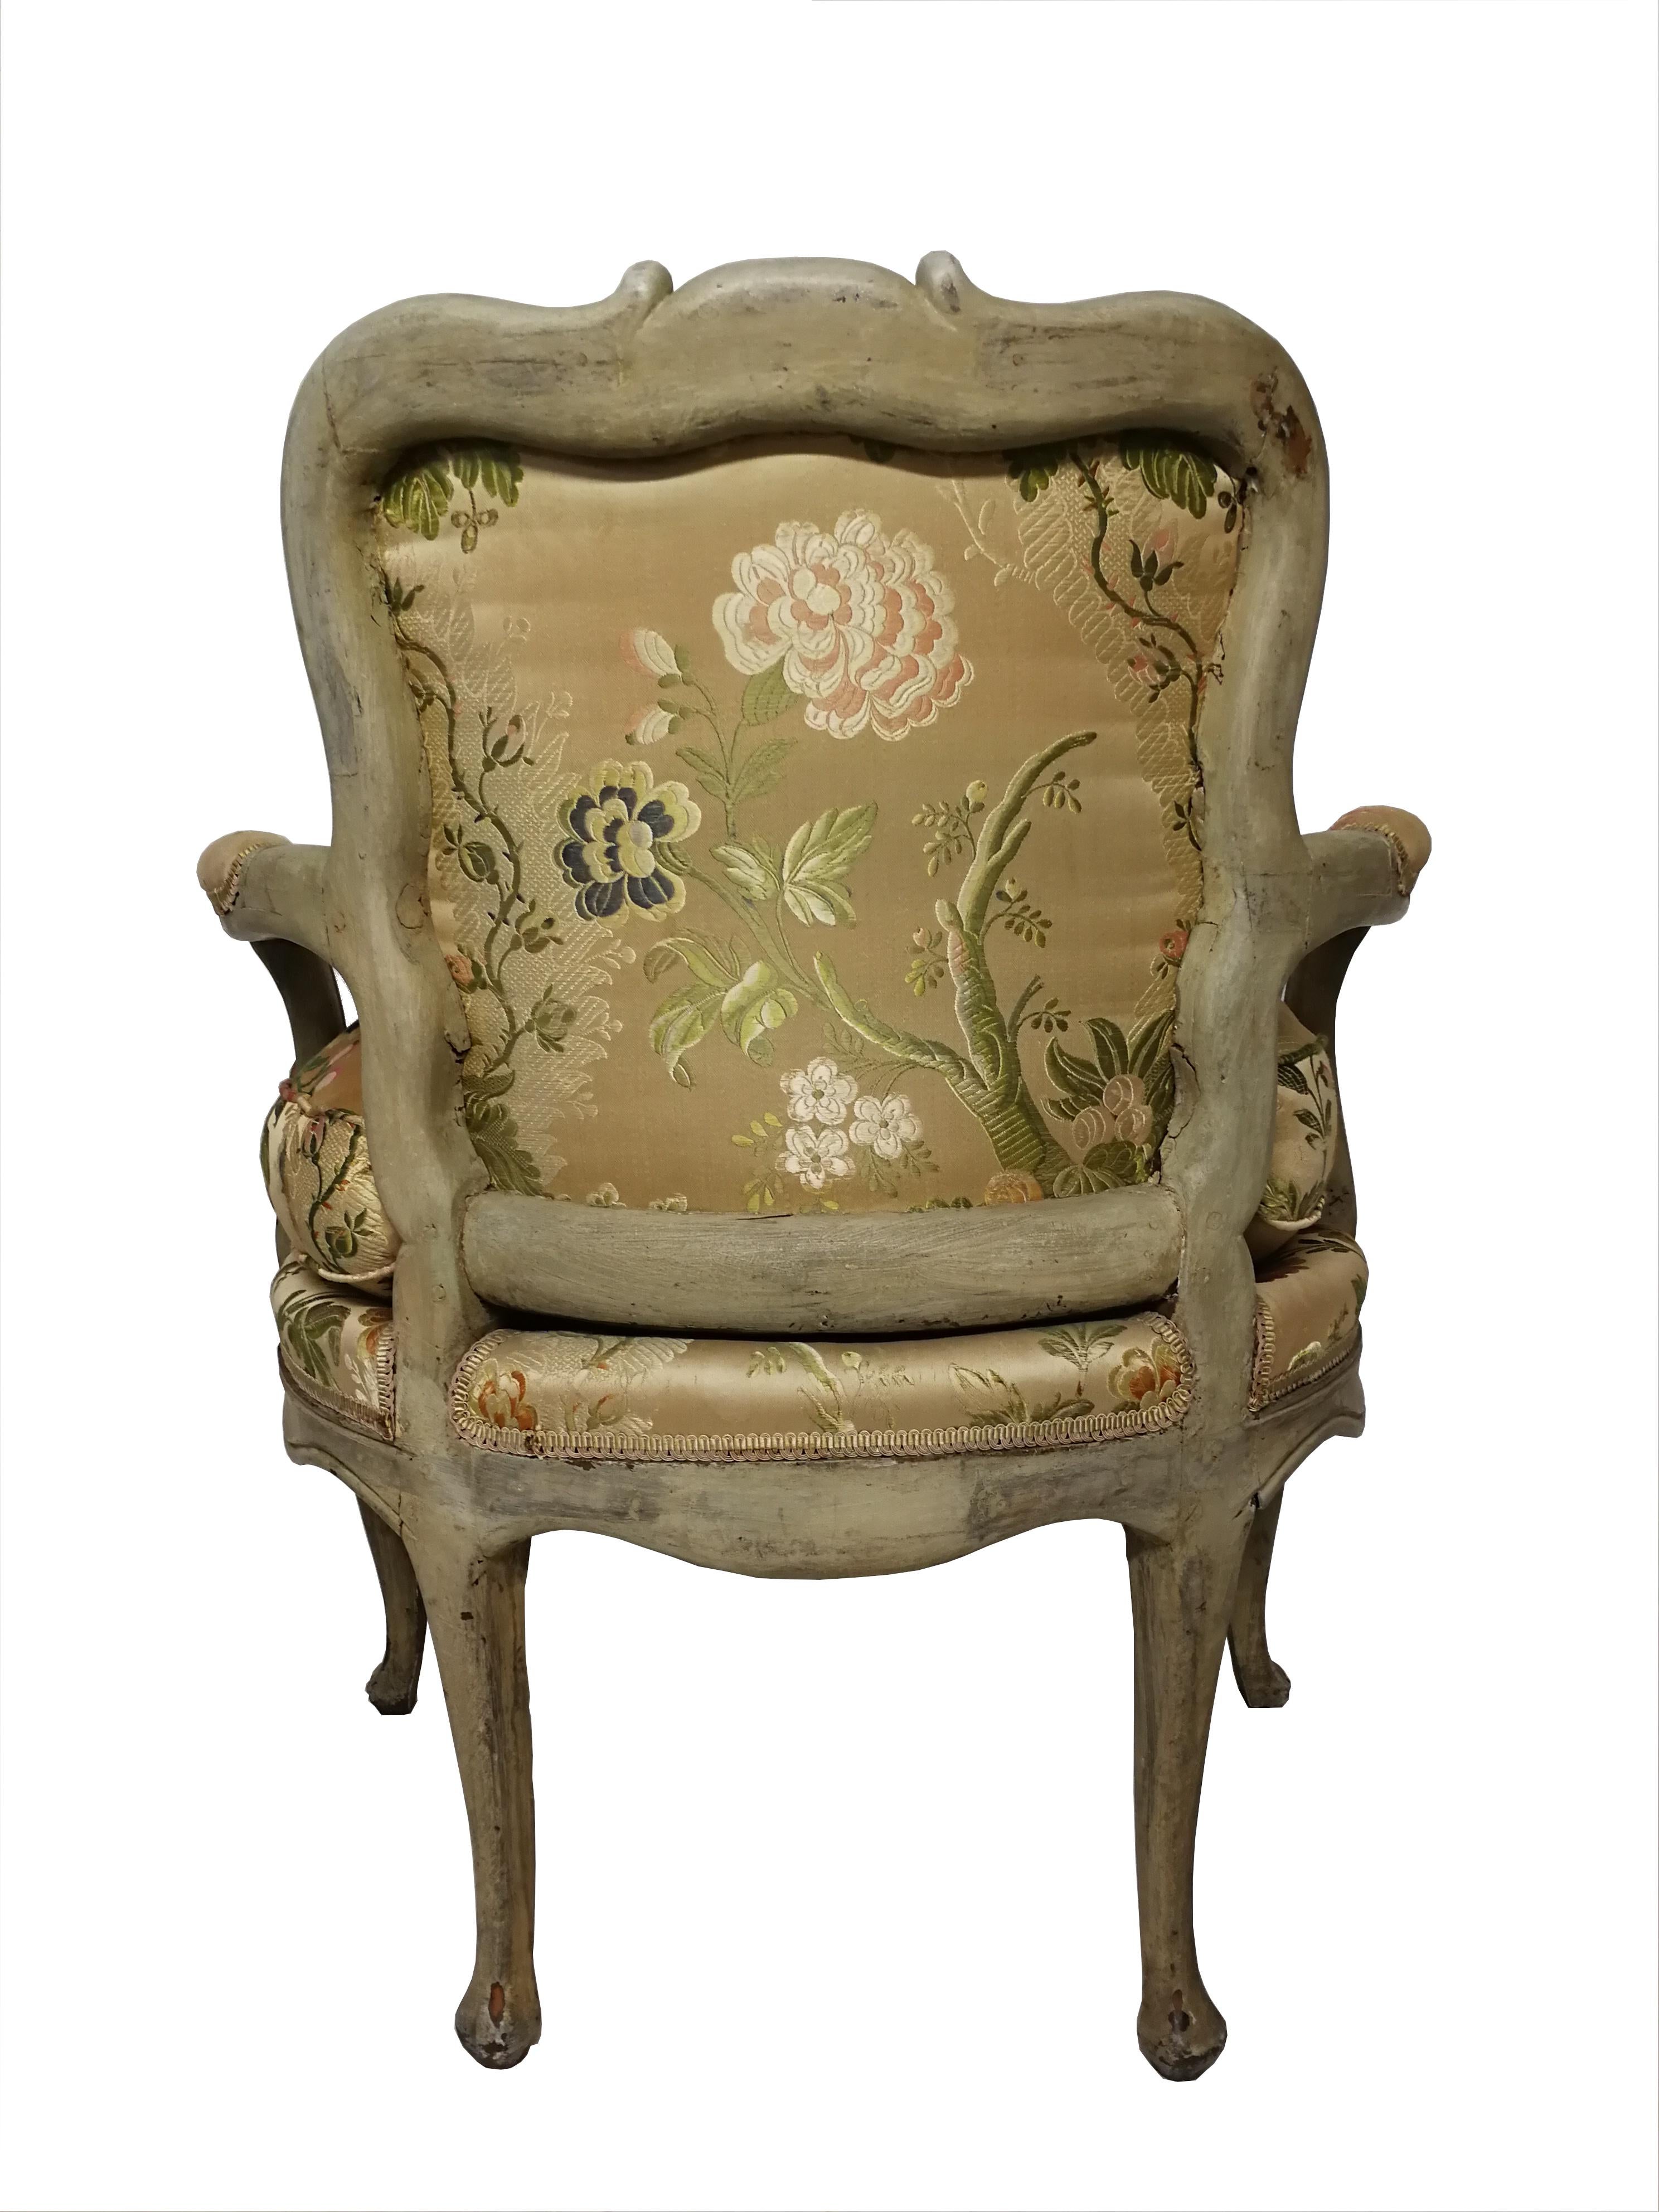 Petit fauteuil Louis XV d’époque
Small low Louis XV armchair of the 18th century. It keeps its original grey paint and it was re-upholstered in the 60's with silk handwoven fabric with floral motifs in green, pink and blue tones over cream